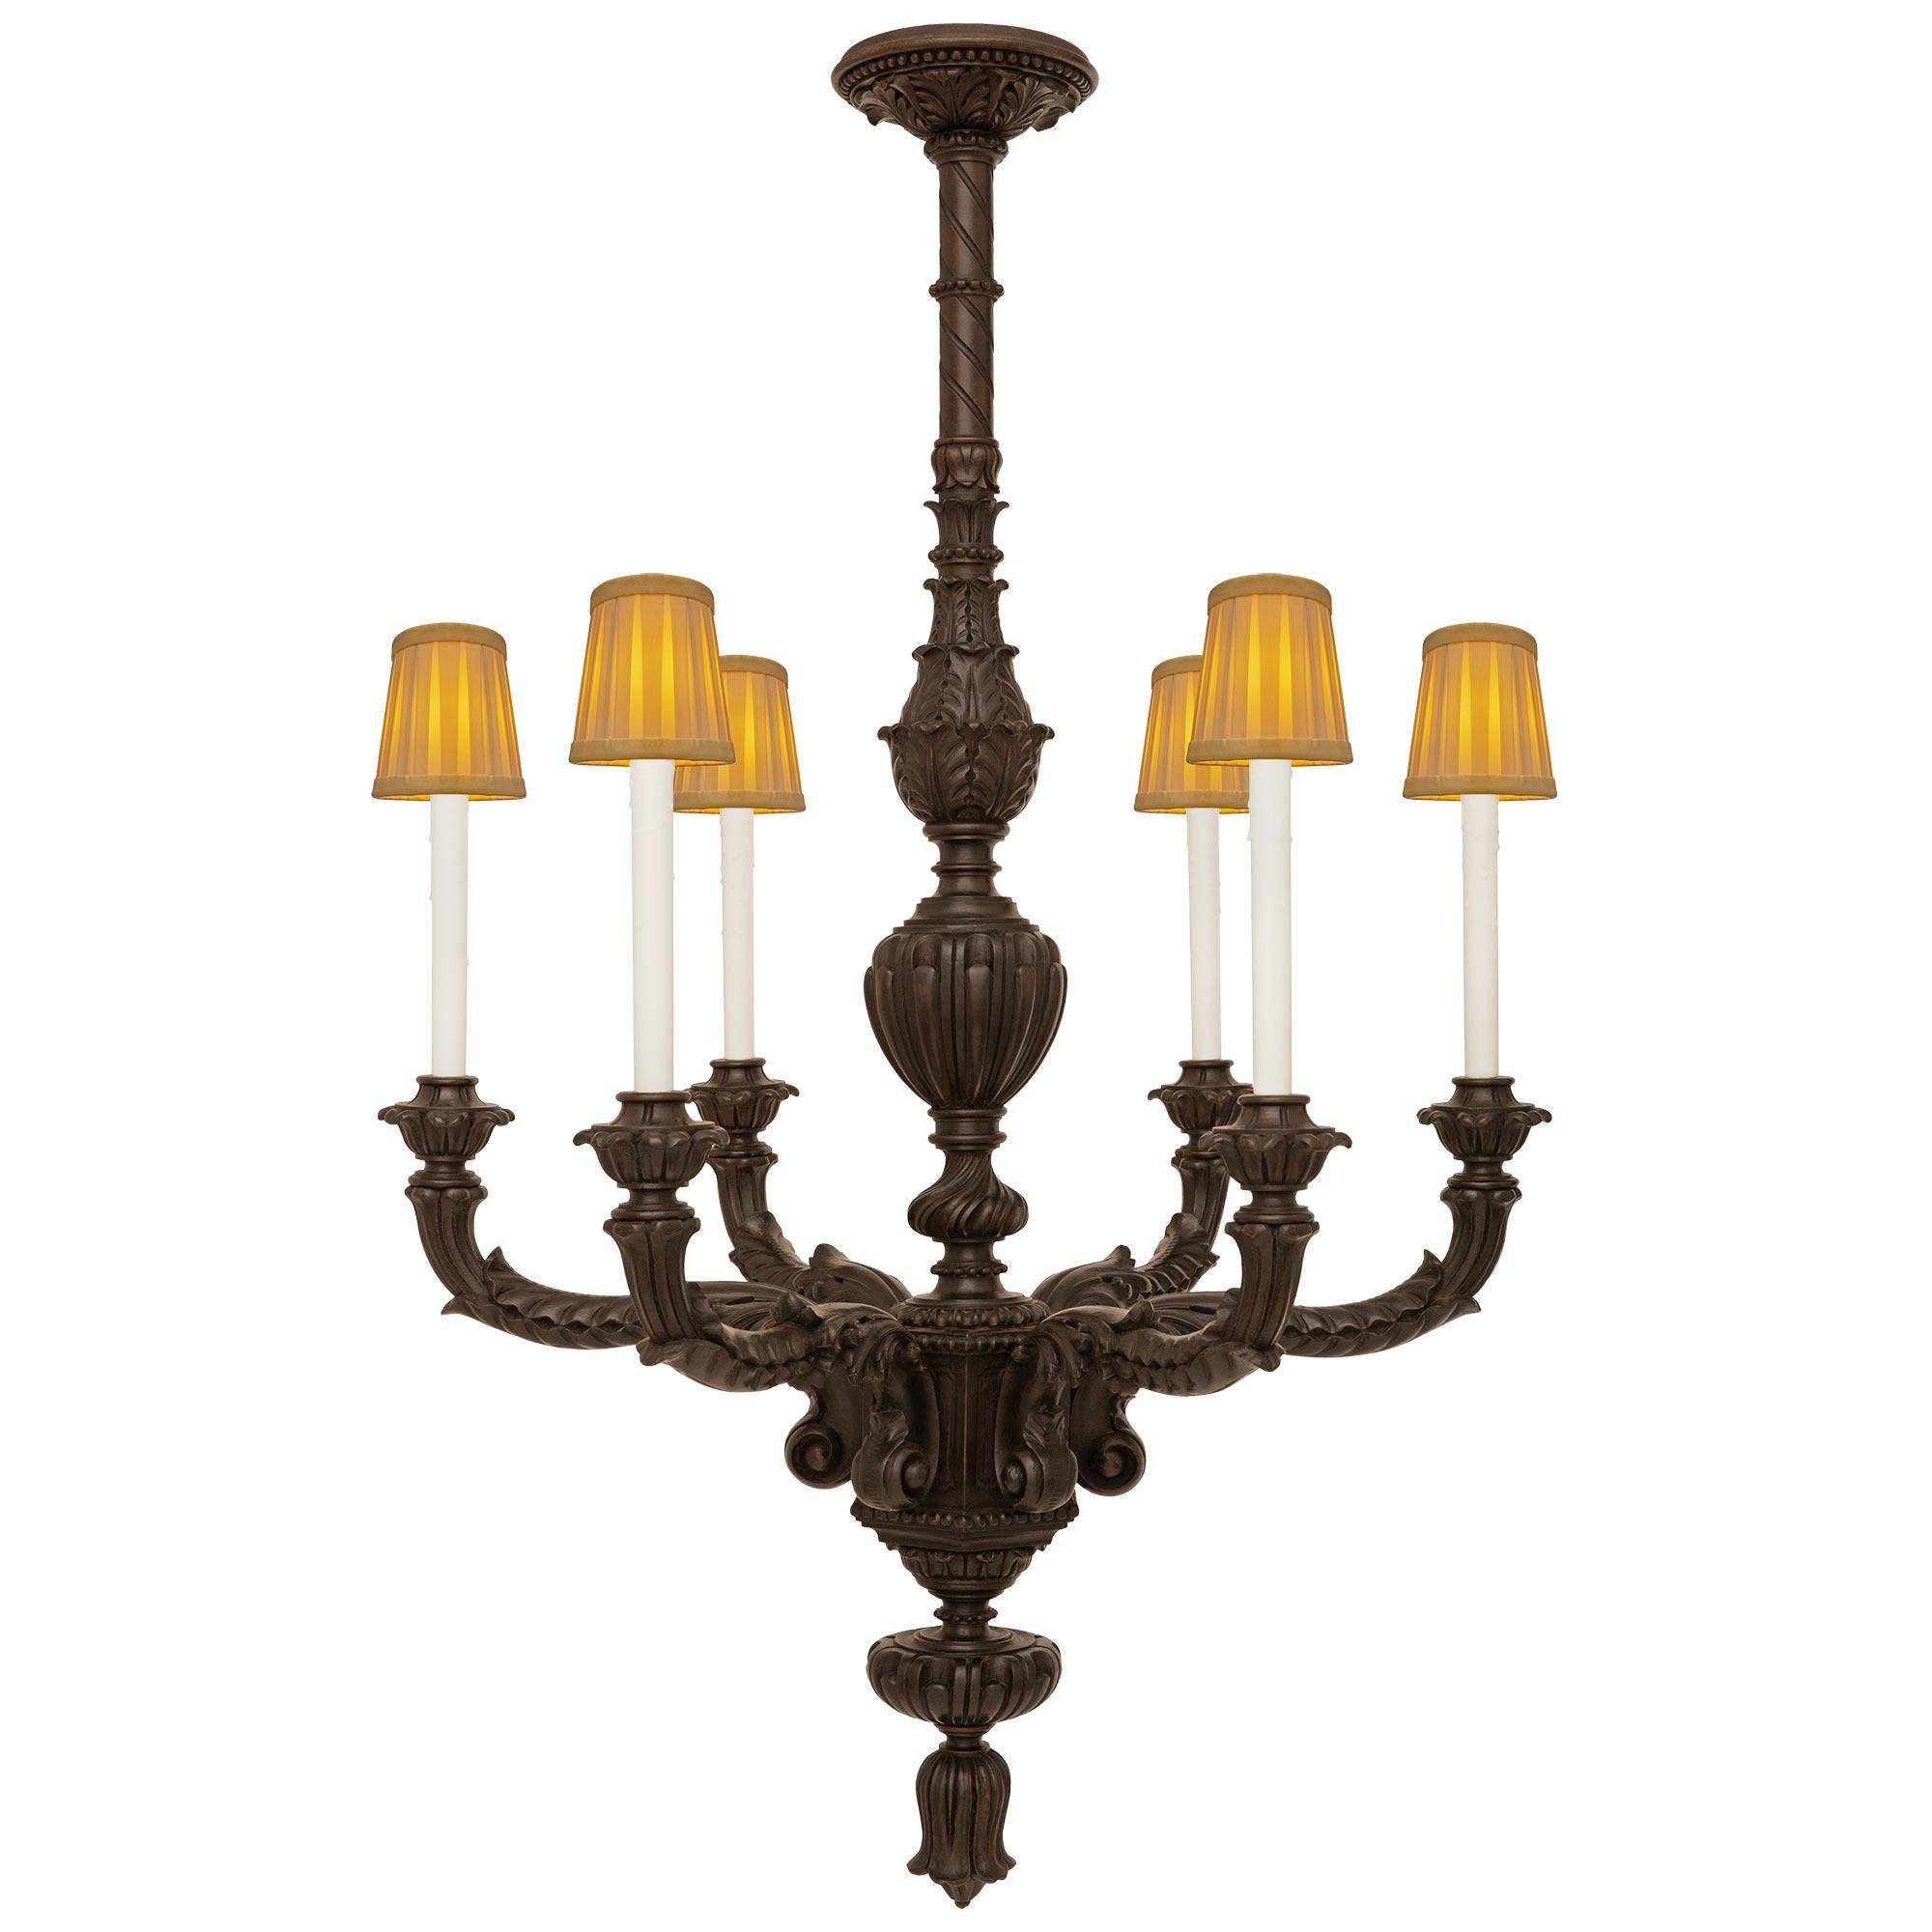 A handsome and wonderfully decorative Italian 19th century patinated Oak chandelier. This most unique chandelier is centered at the bottom by an inverted foliate finial below the six 'S' scrolled arms richly decorated with acanthus leaves and ending